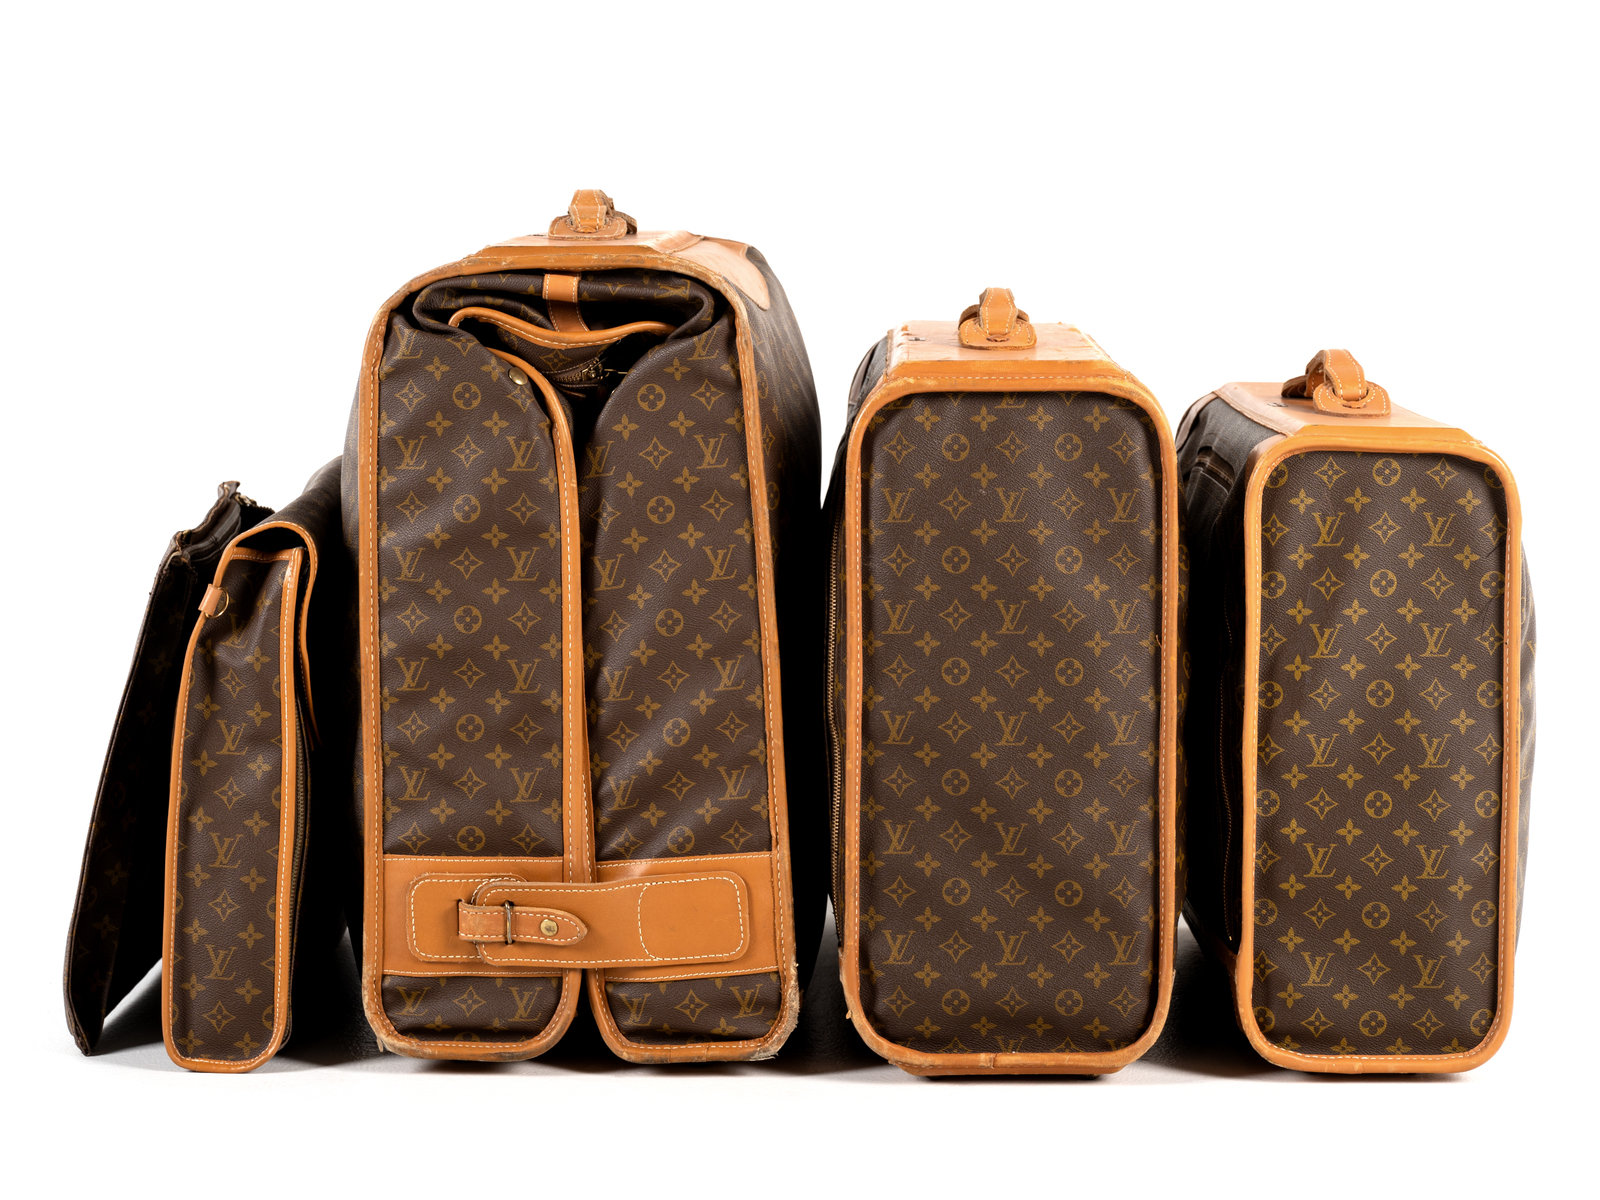 Made in USA Louis Vuitton Bags: Does Country of Origin matter in